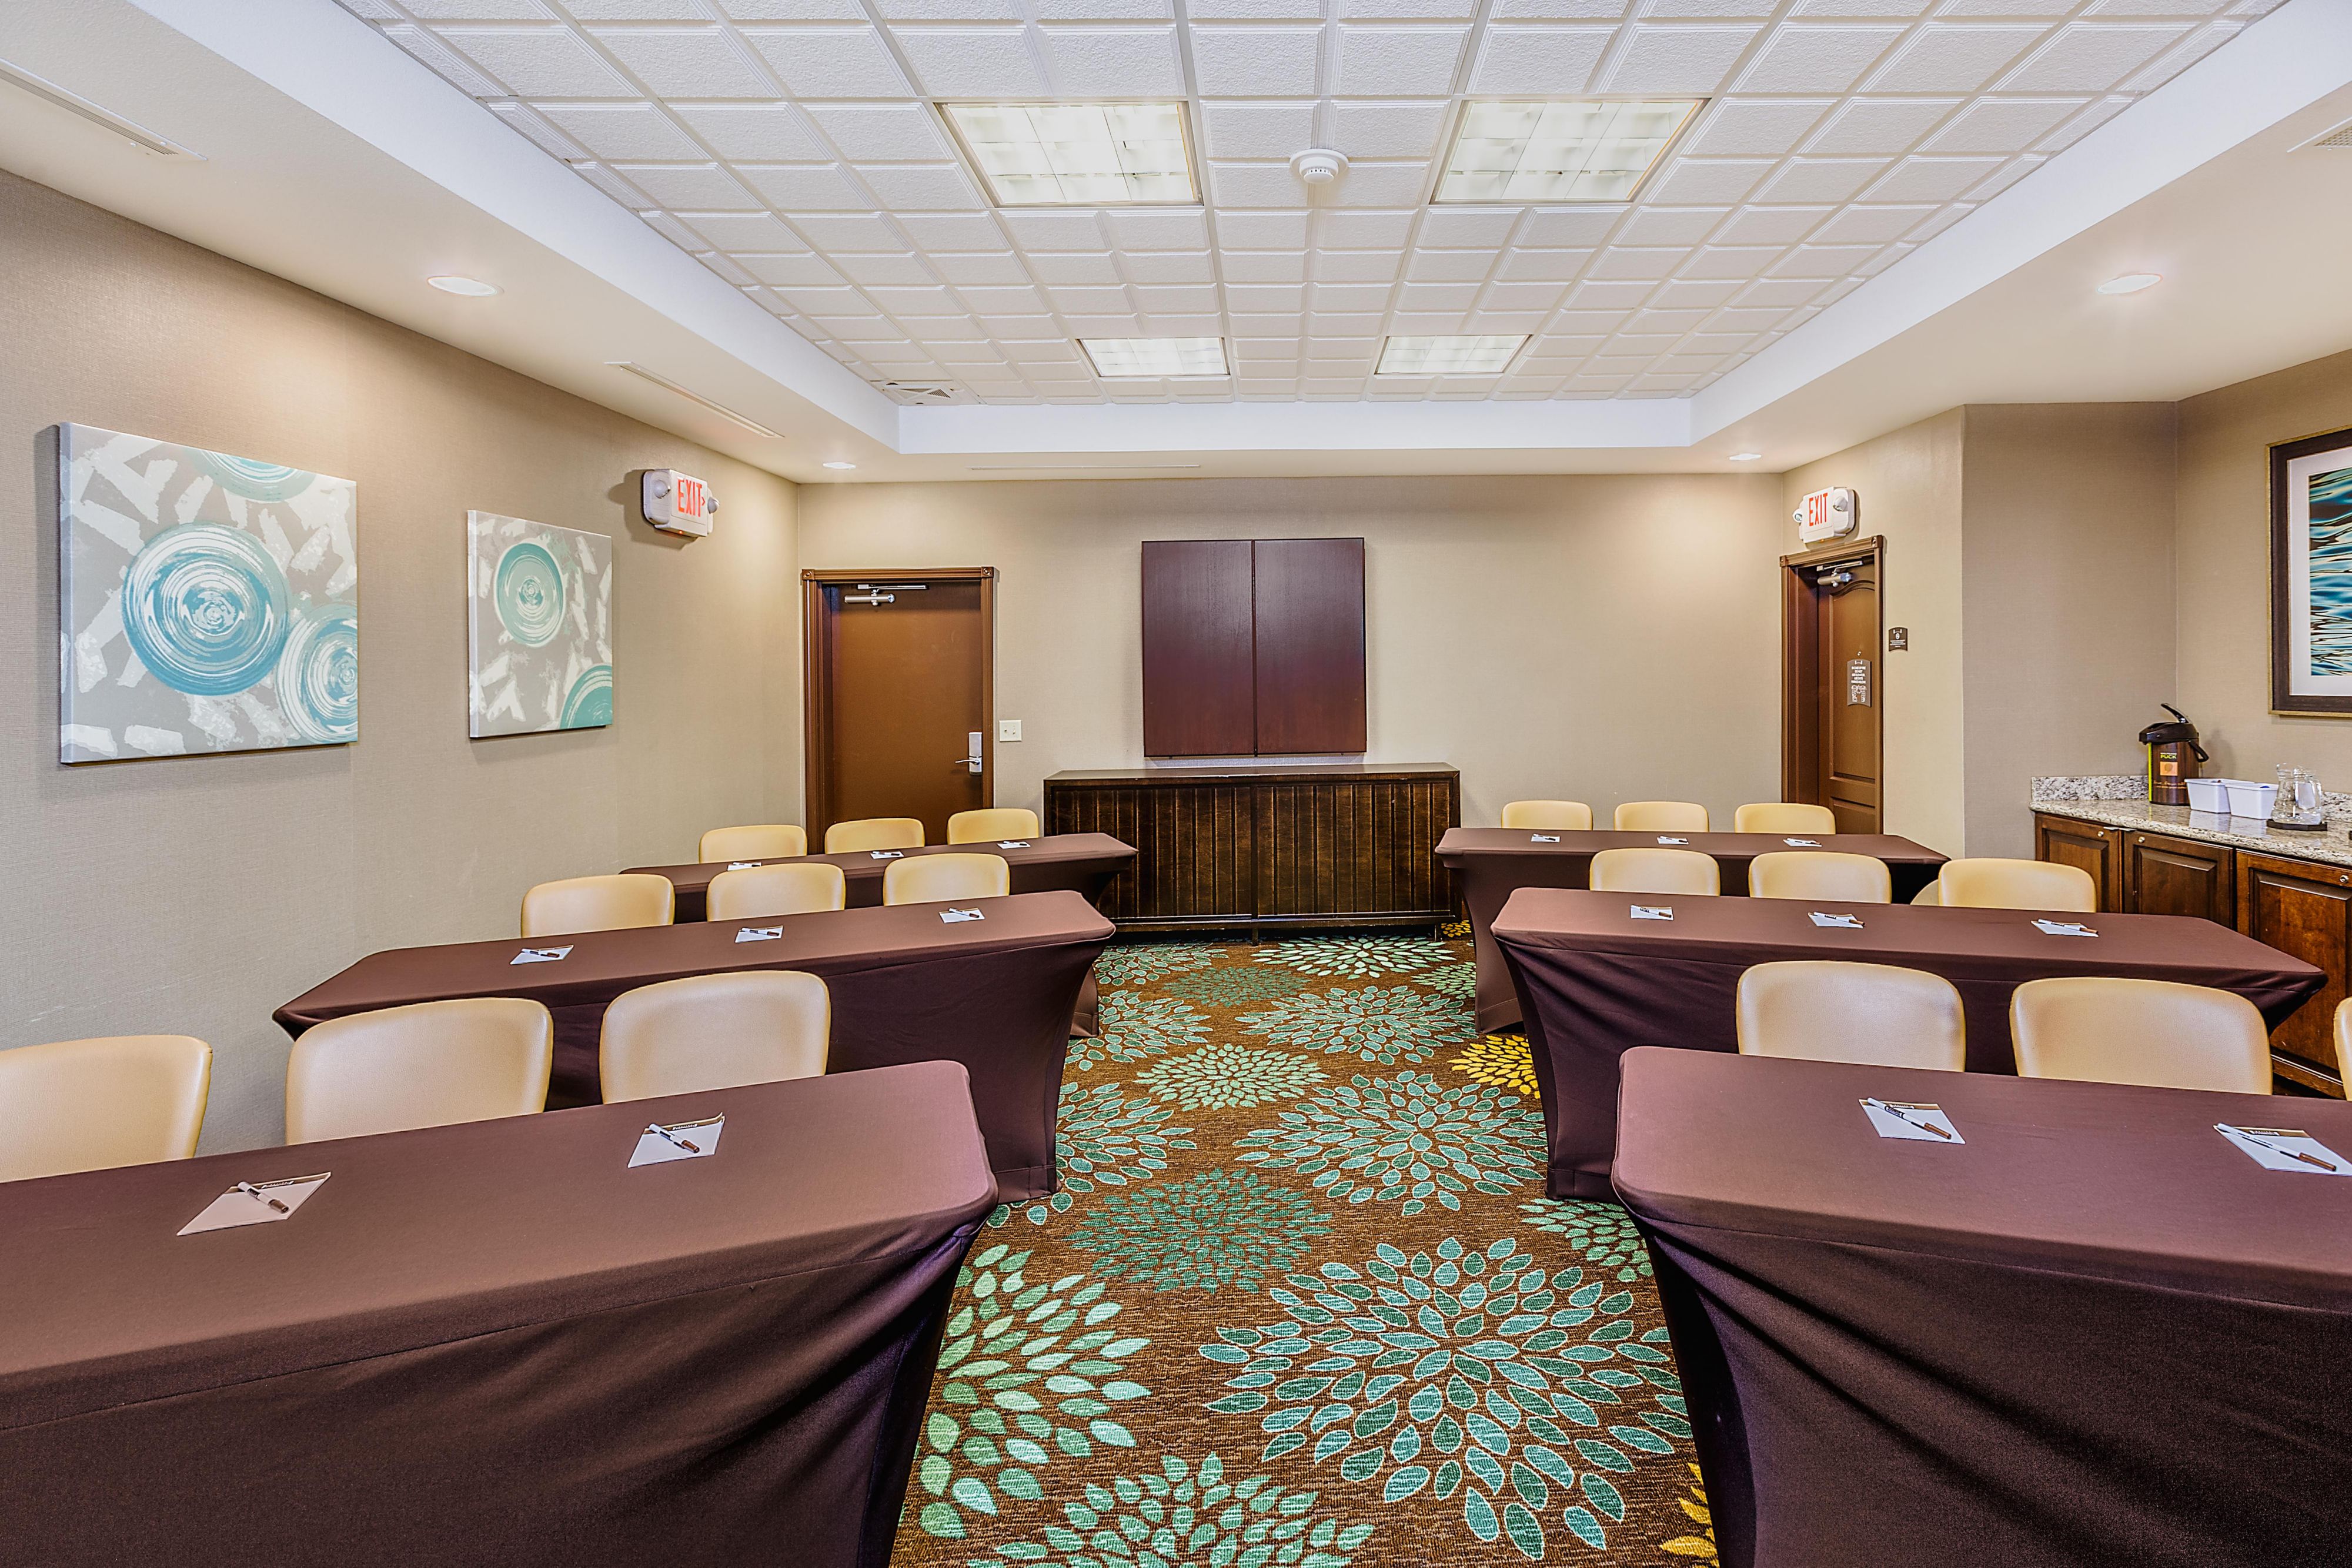 Our "Bakken" meeting room is available to rent for small business meetings.  Call and reserve this meeting room today!